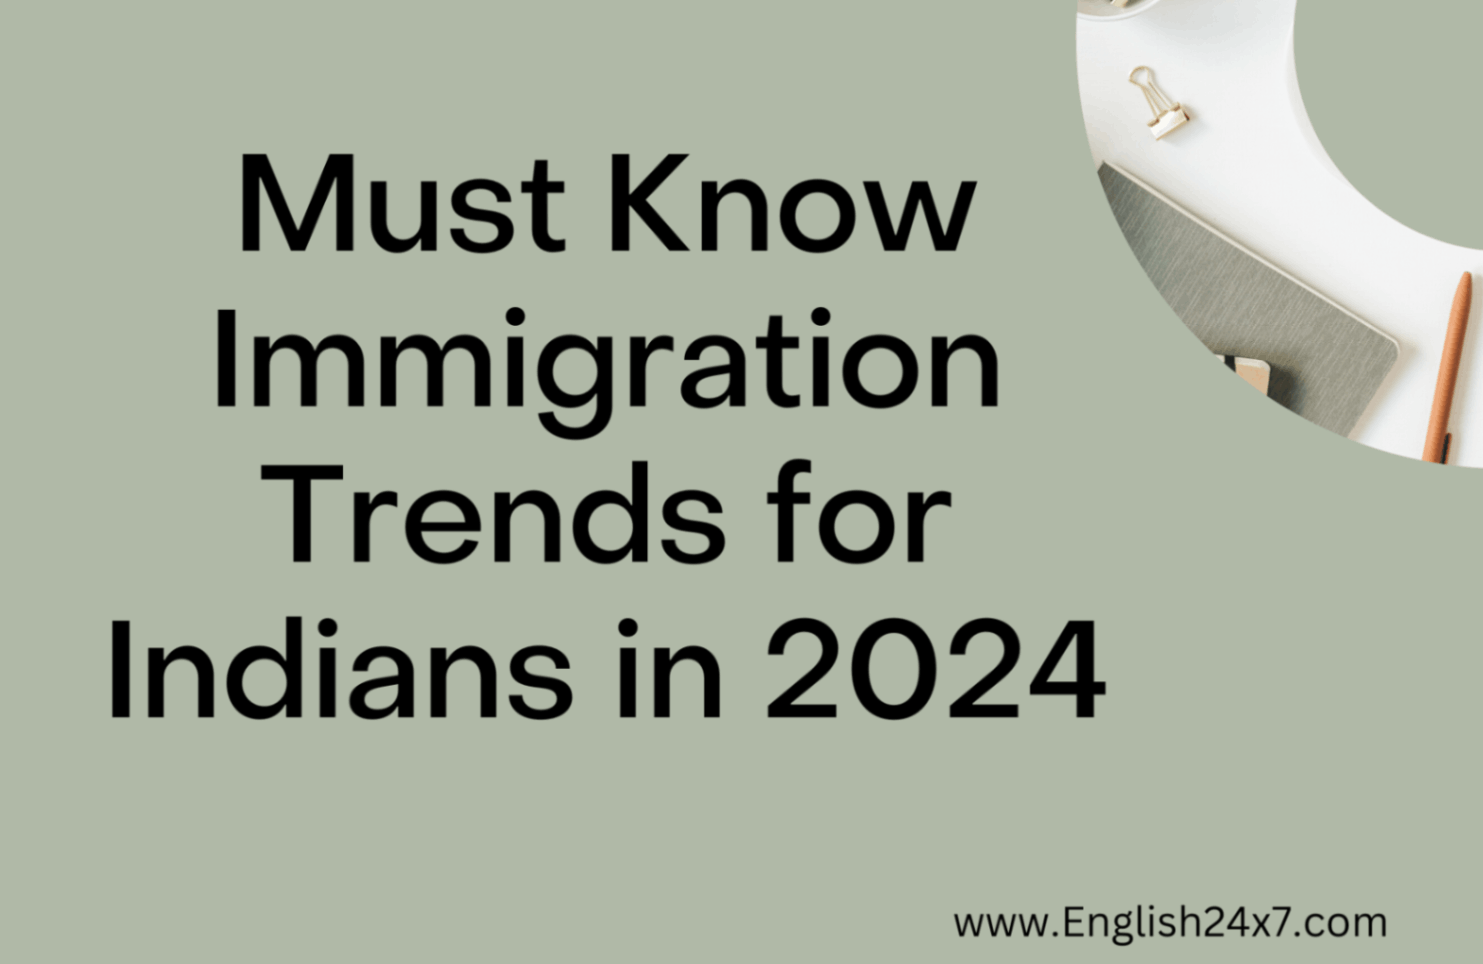 Must Know Immigration Trends For Indians in 2024